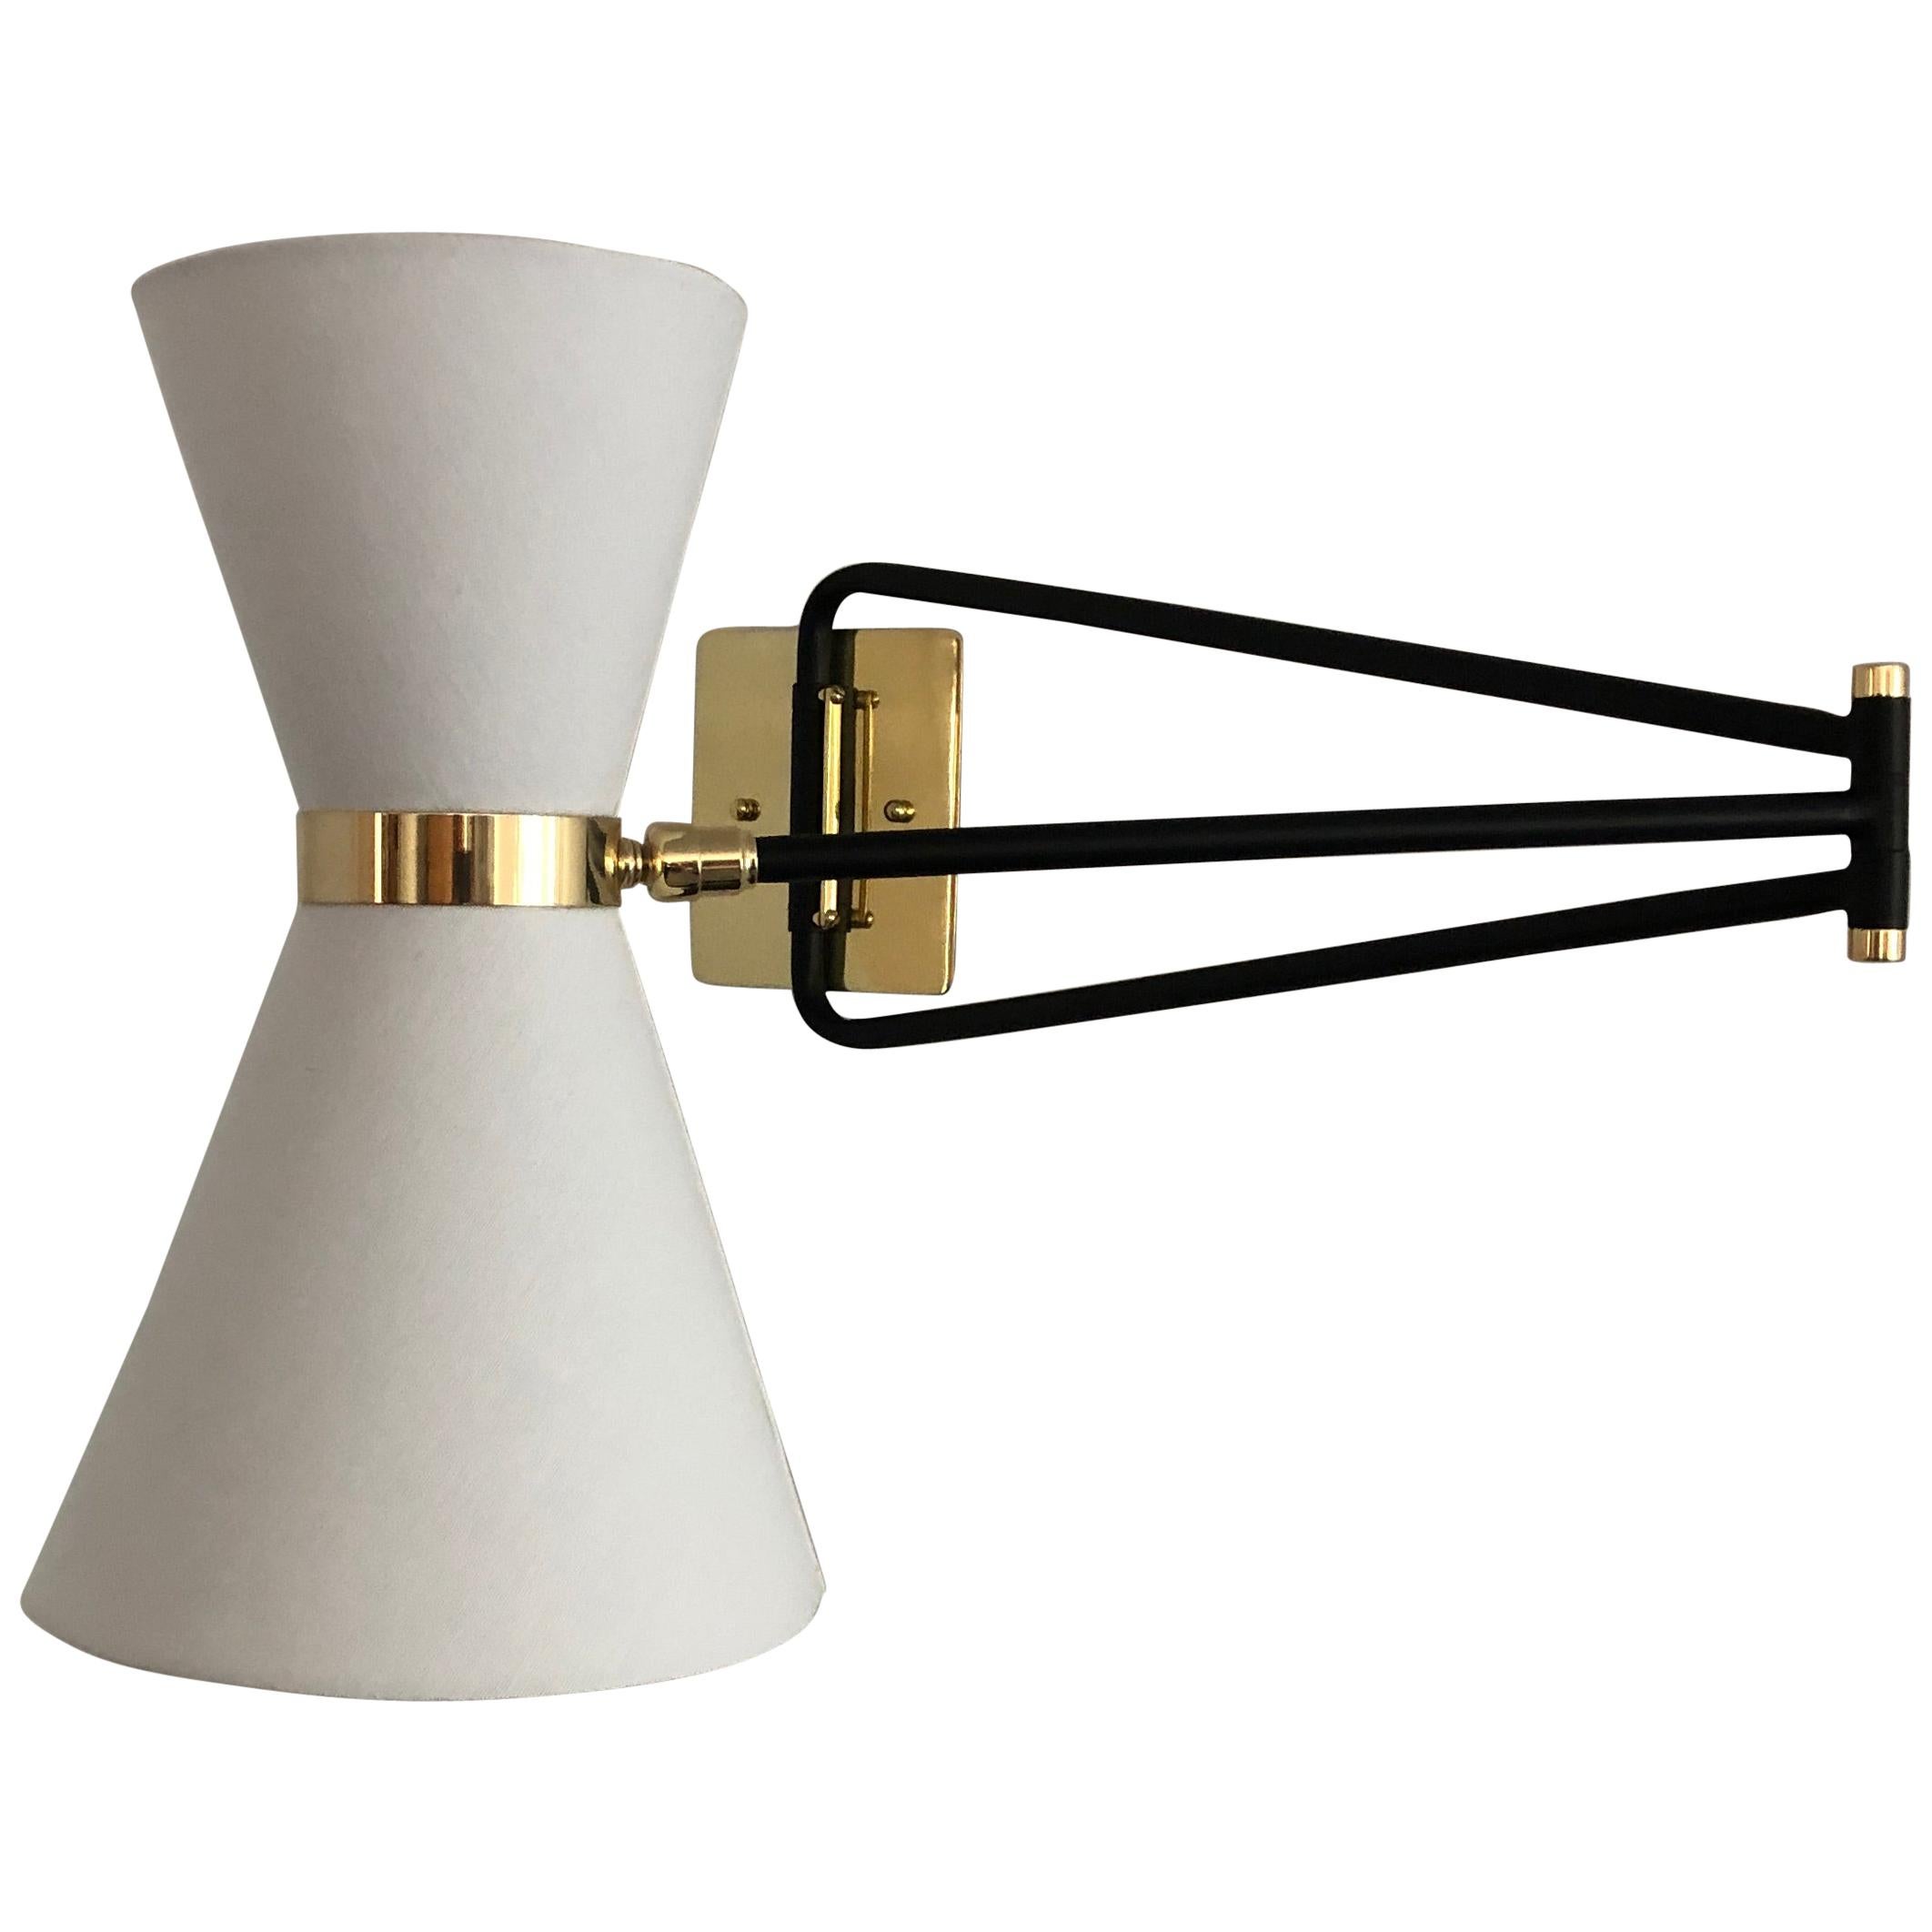 Bolivar Sconce, White Fabric Shade, by Bourgeois Boheme Atelier For Sale